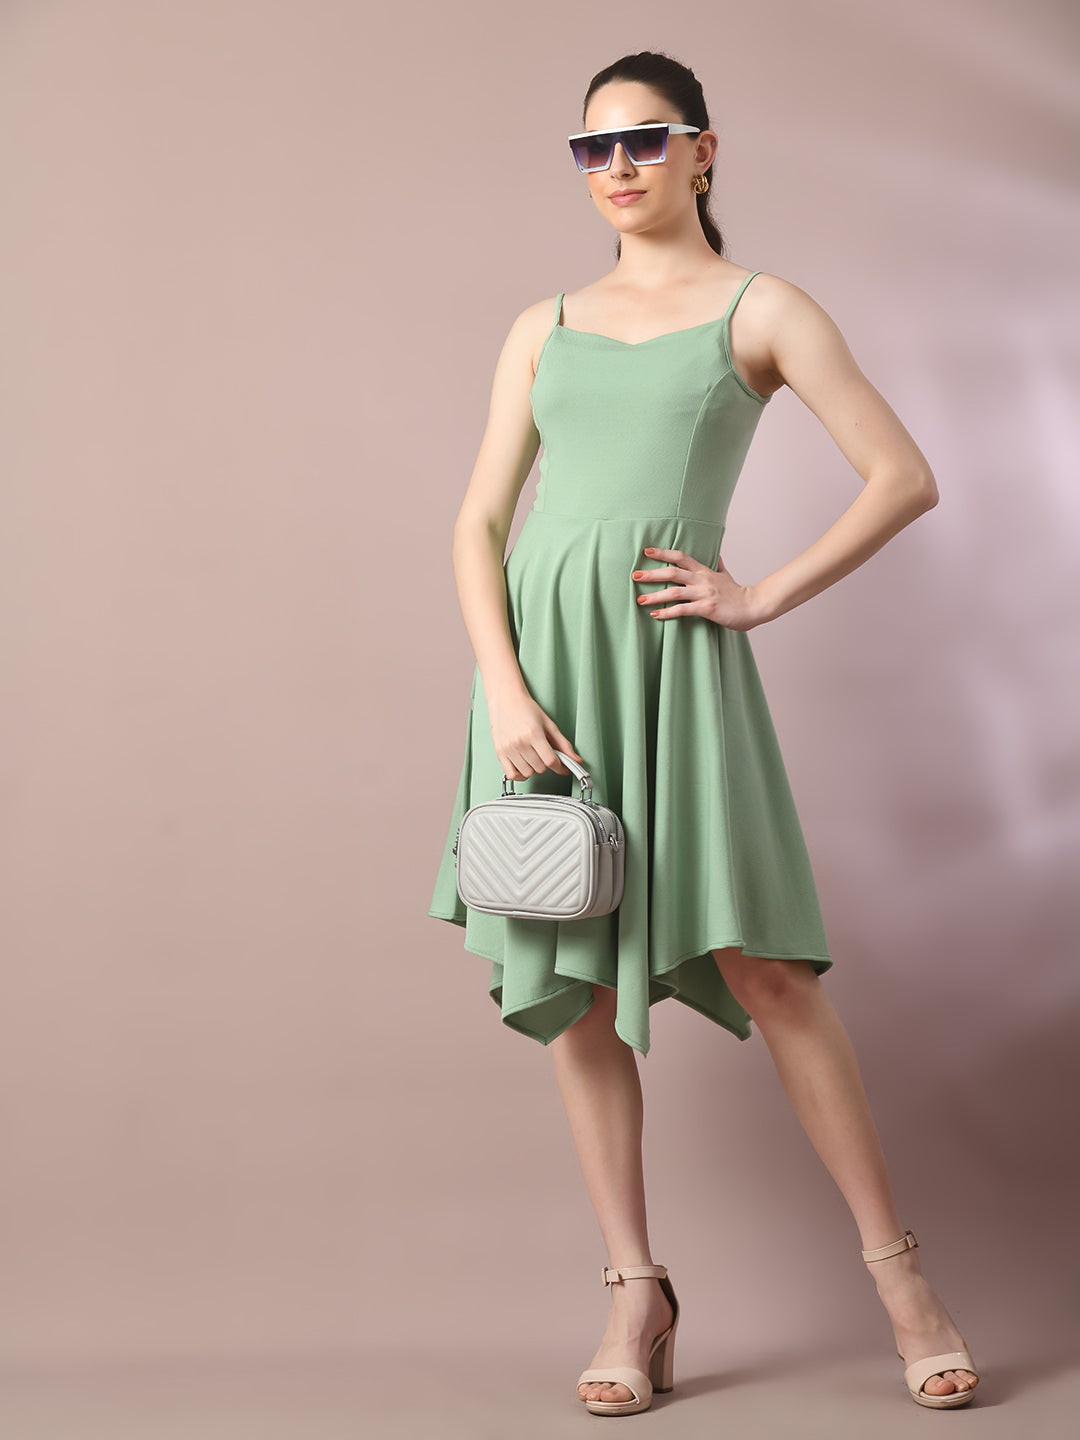 Women's  Sea Green Solid Shoulder Straps Fit And Flare Party Dress  - Myshka